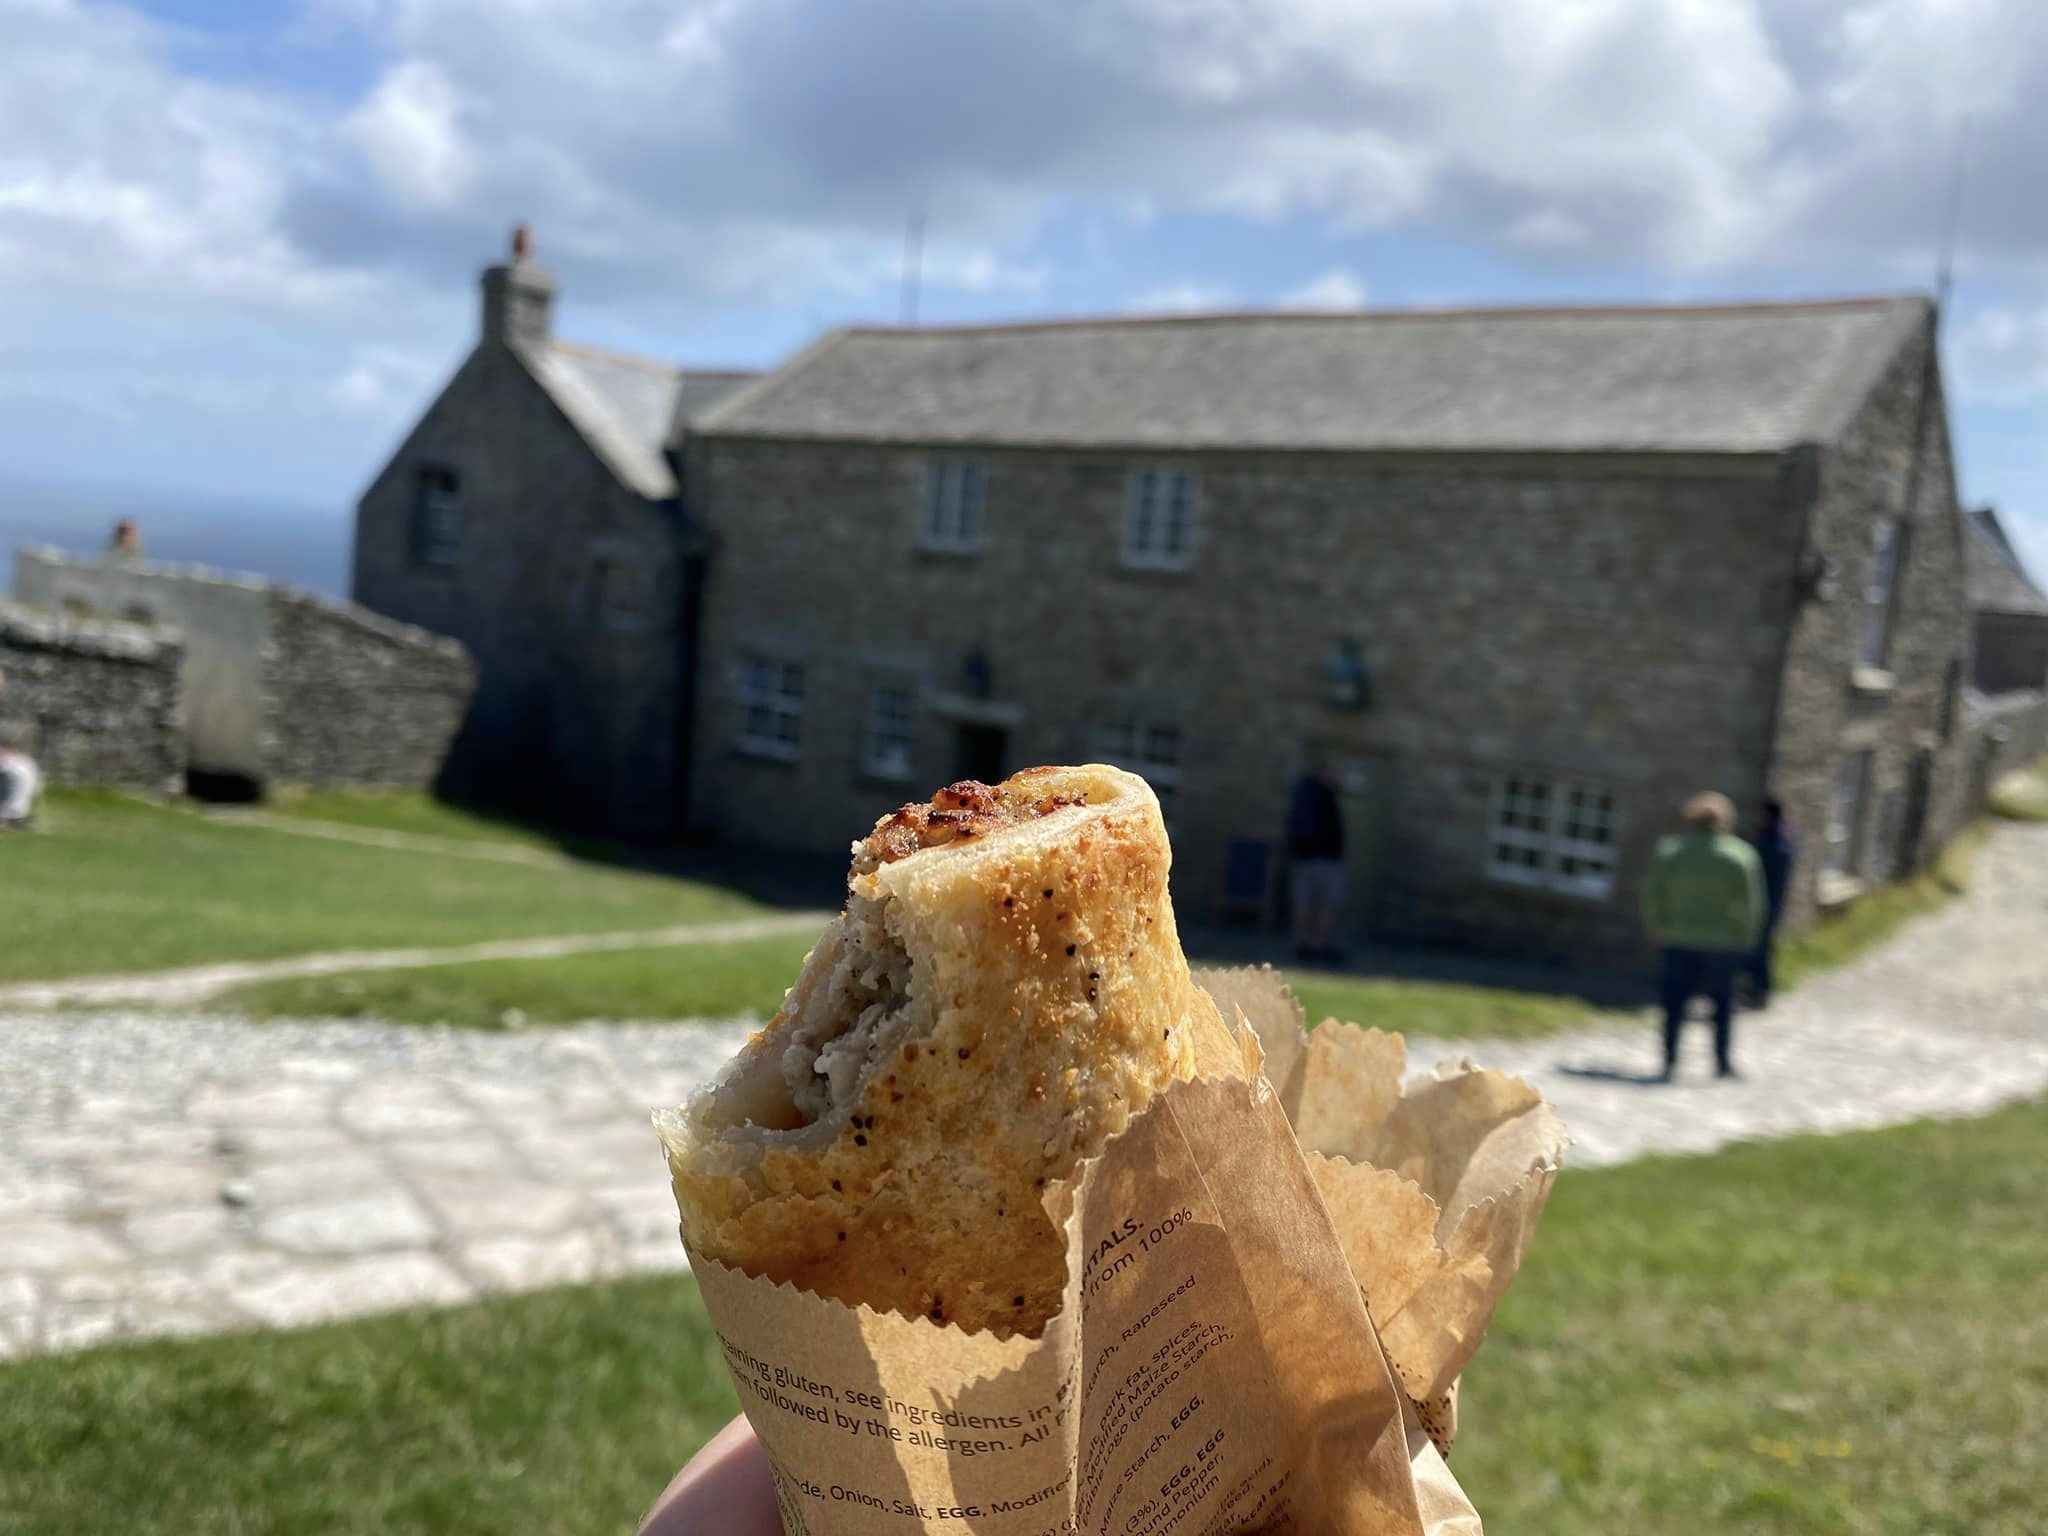 Sausage Roll from Marisco Tavern on Lundy Island